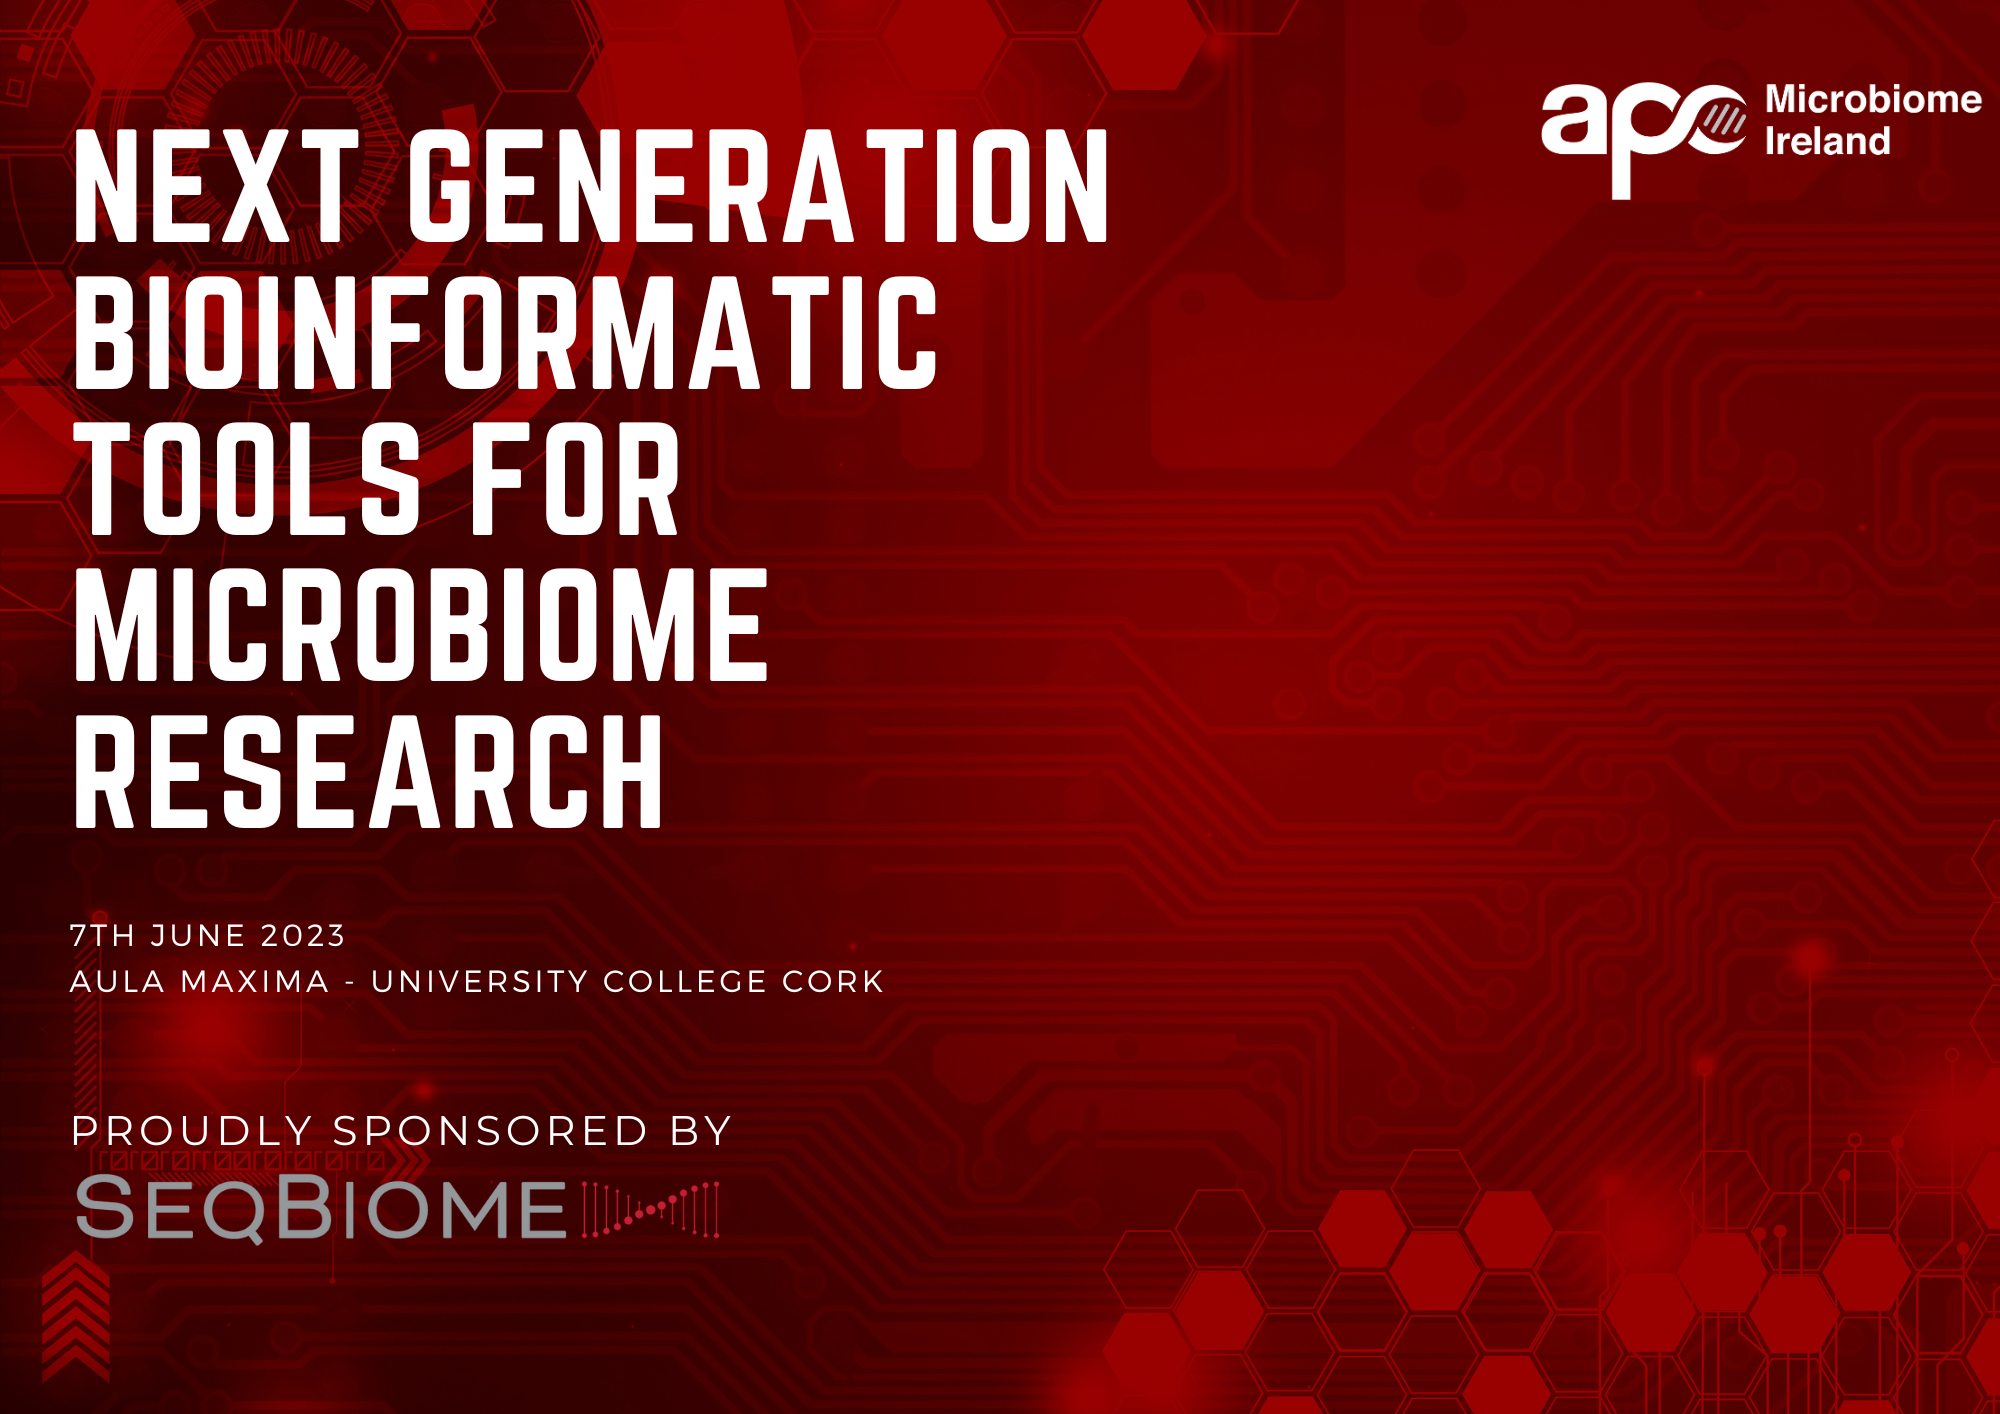 Next Generation Bioinformatics Tools for Microbiome Research
